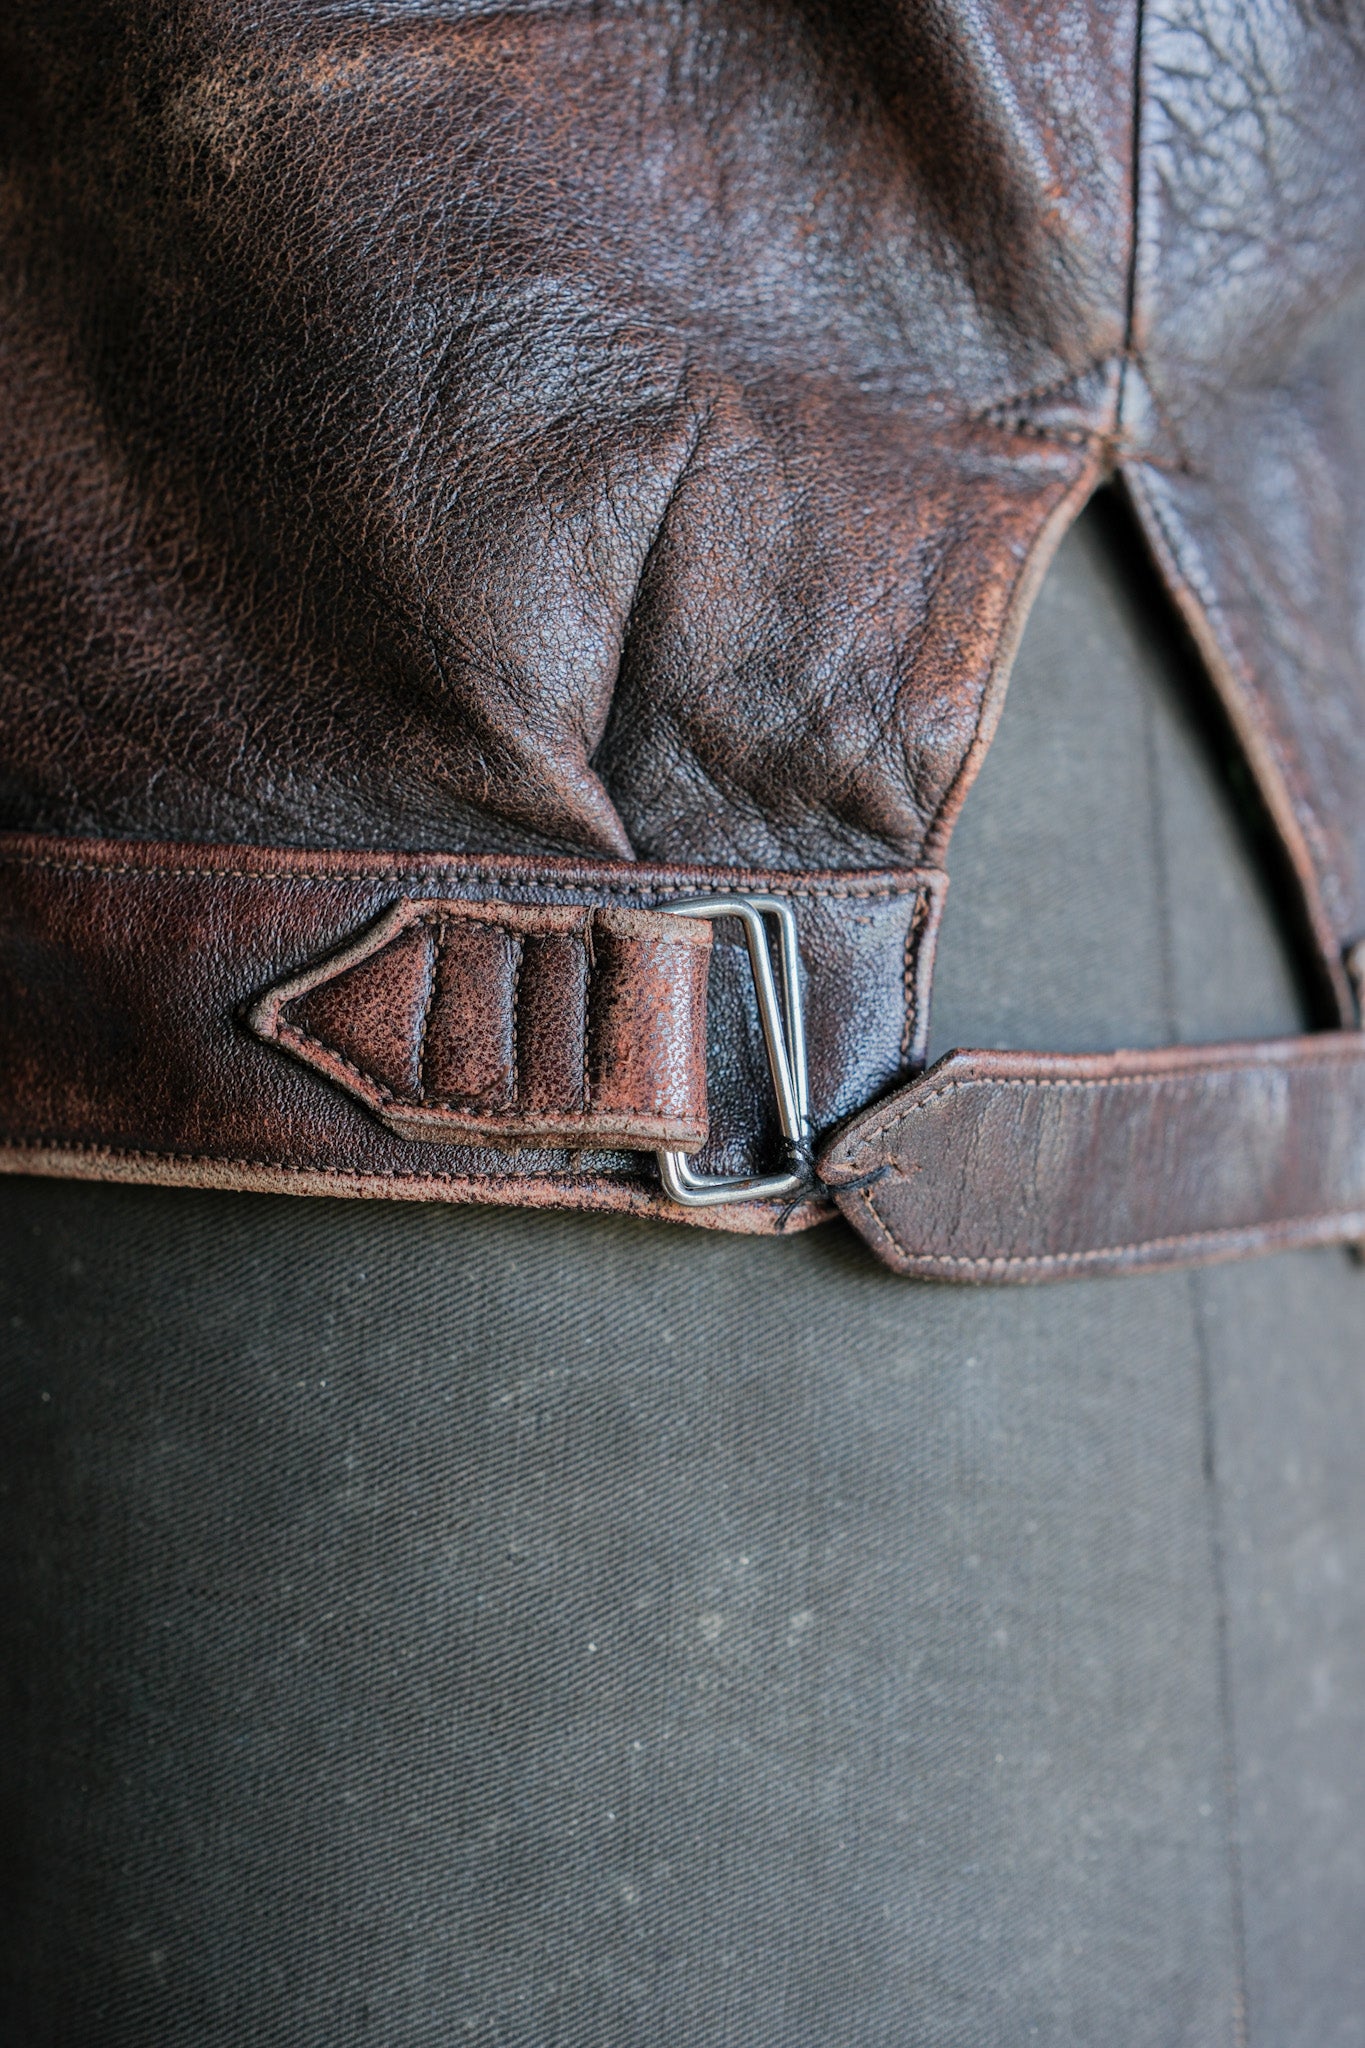 【~40's】French Vintage Leather Cyclist Jacket